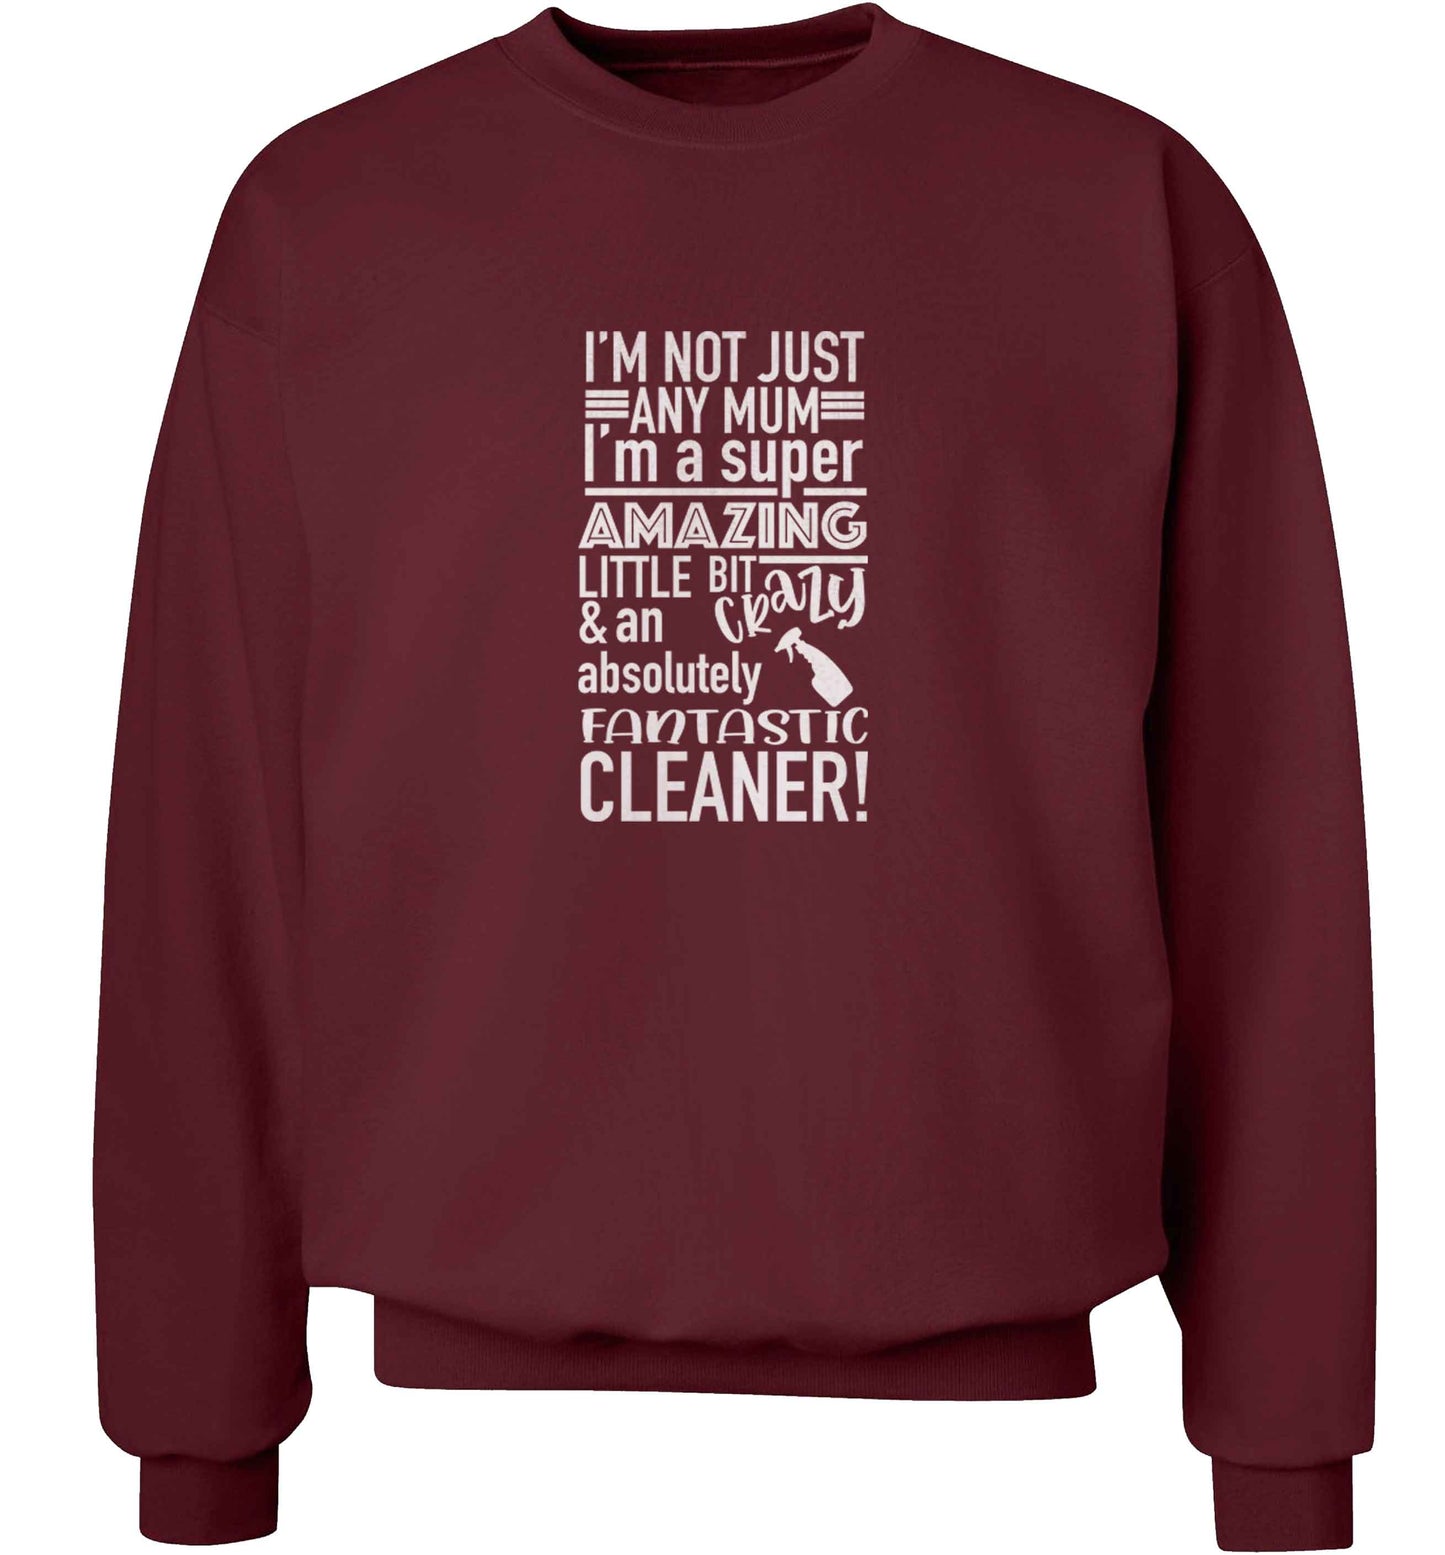 I'm not just any mum I'm a super amazing little bit crazy and an absolutely fantastic cleaner! adult's unisex maroon sweater 2XL